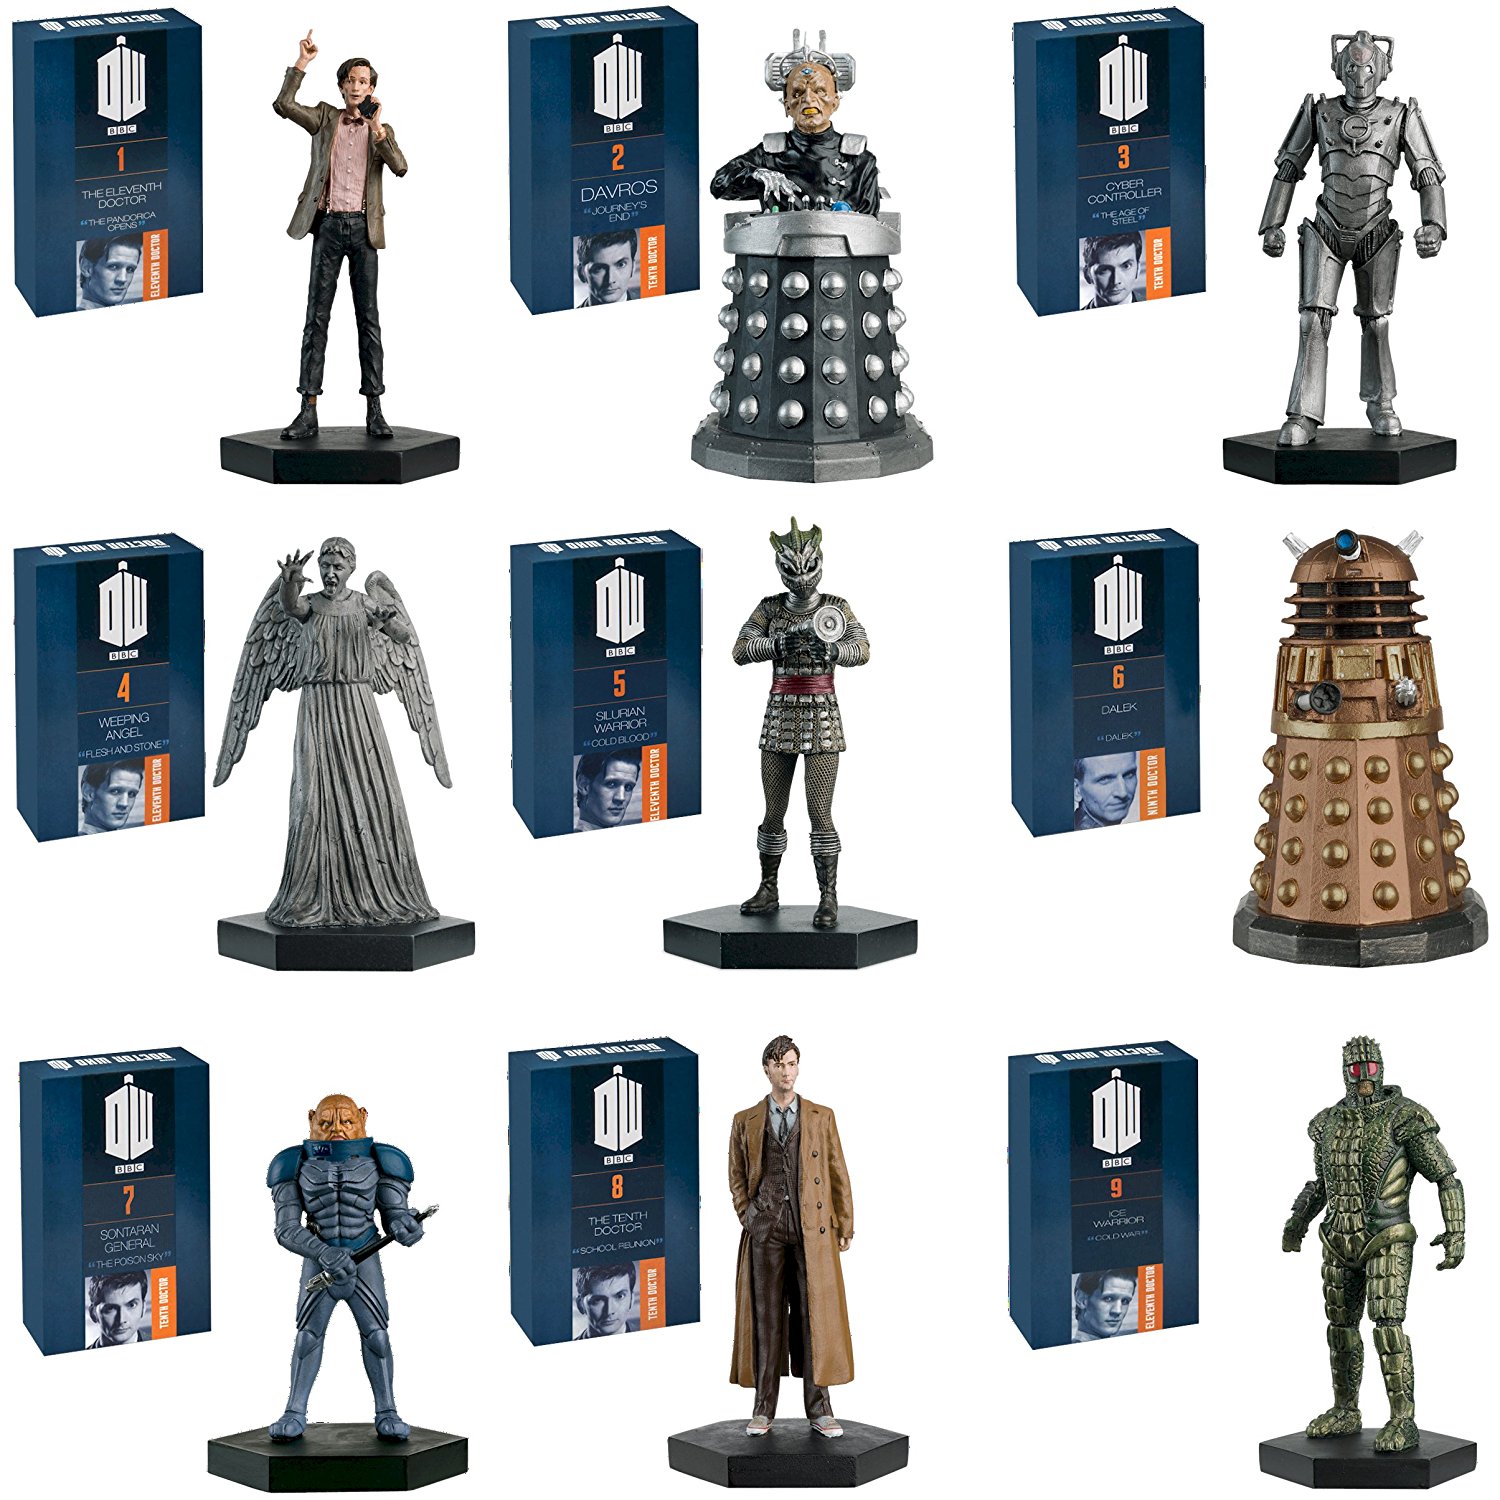 Doctor Who Eaglemoss Figurine Collection Silent 1:21 scale #10  in series 